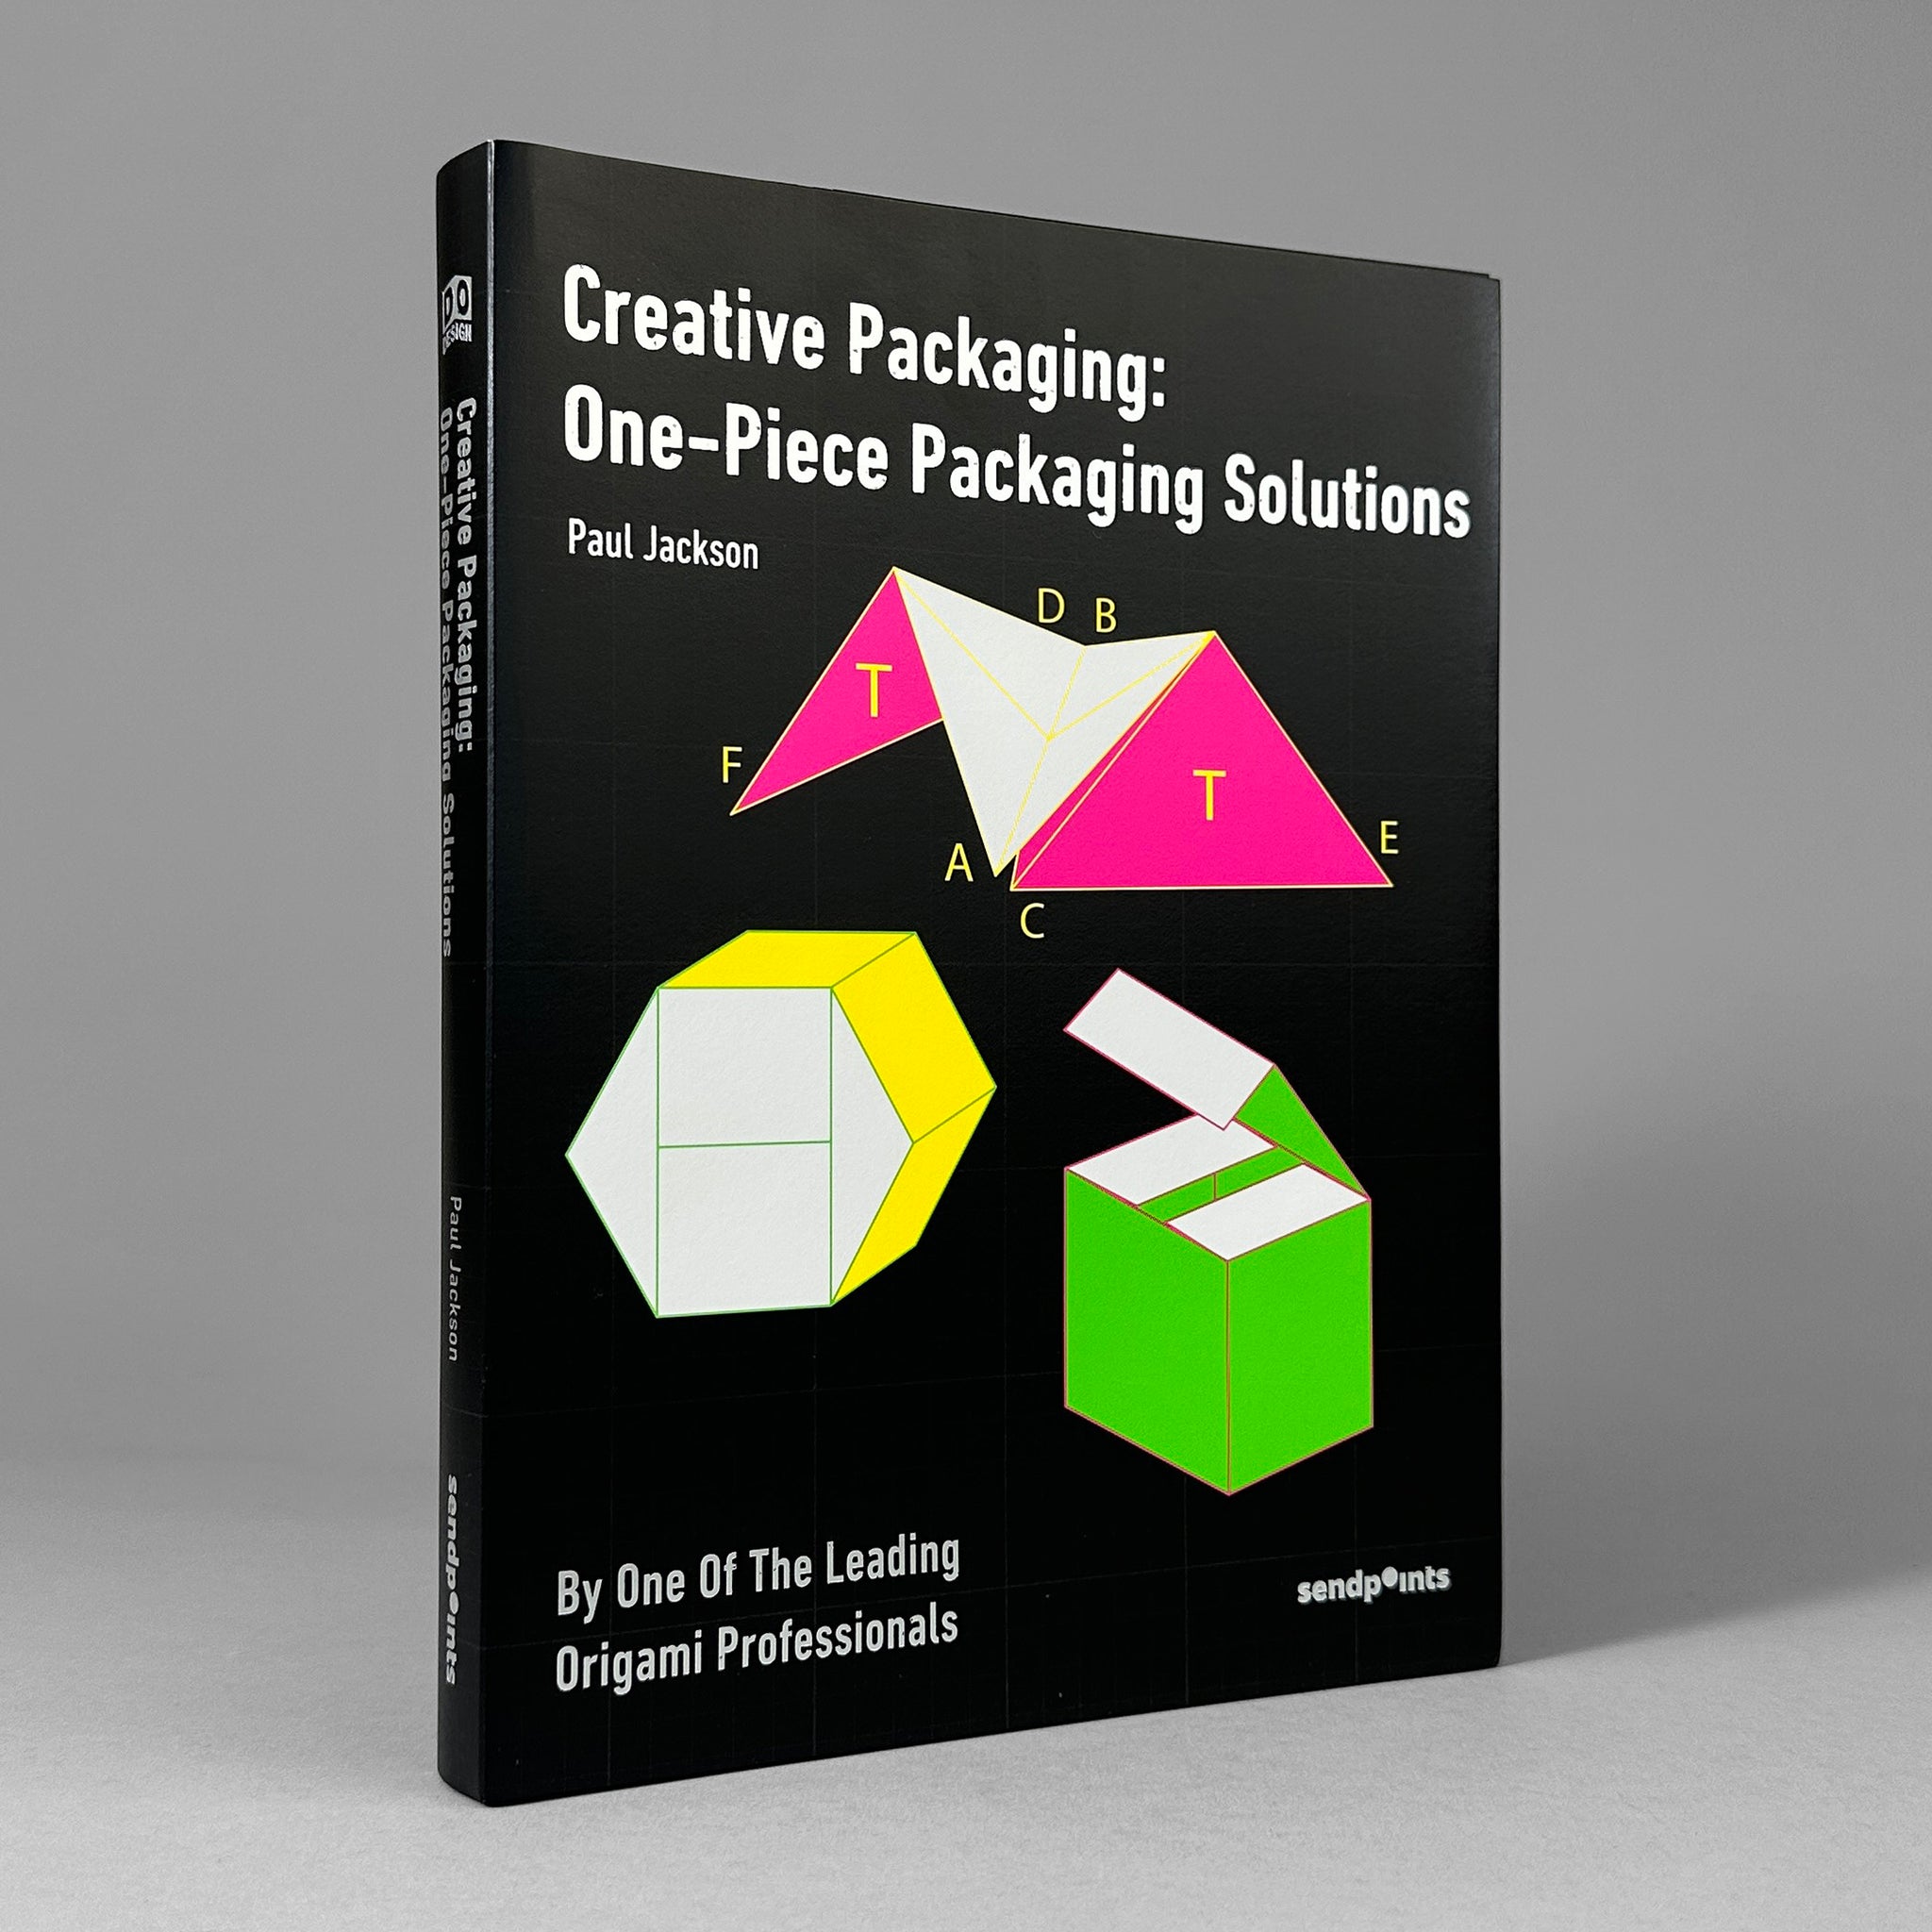 Creative Packaging: One-Piece Packaging Solutions